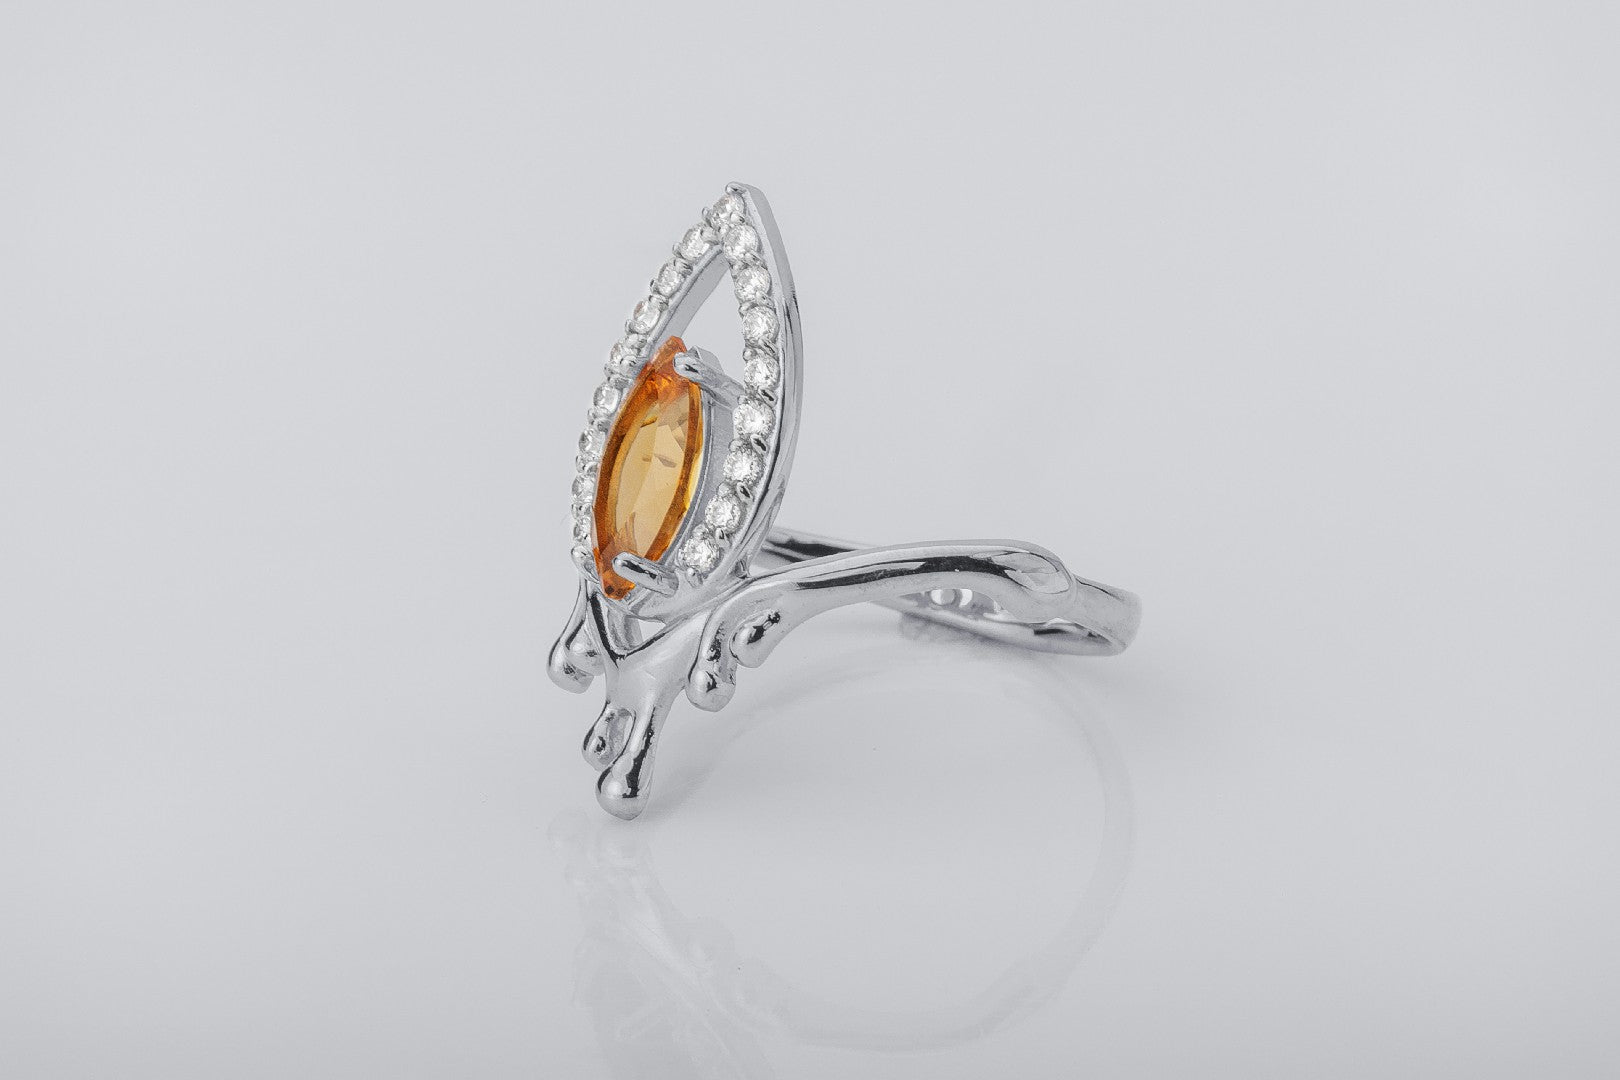 Candle Flame Ring with Citrine and CZ gems, Rhodium plated 925 silver